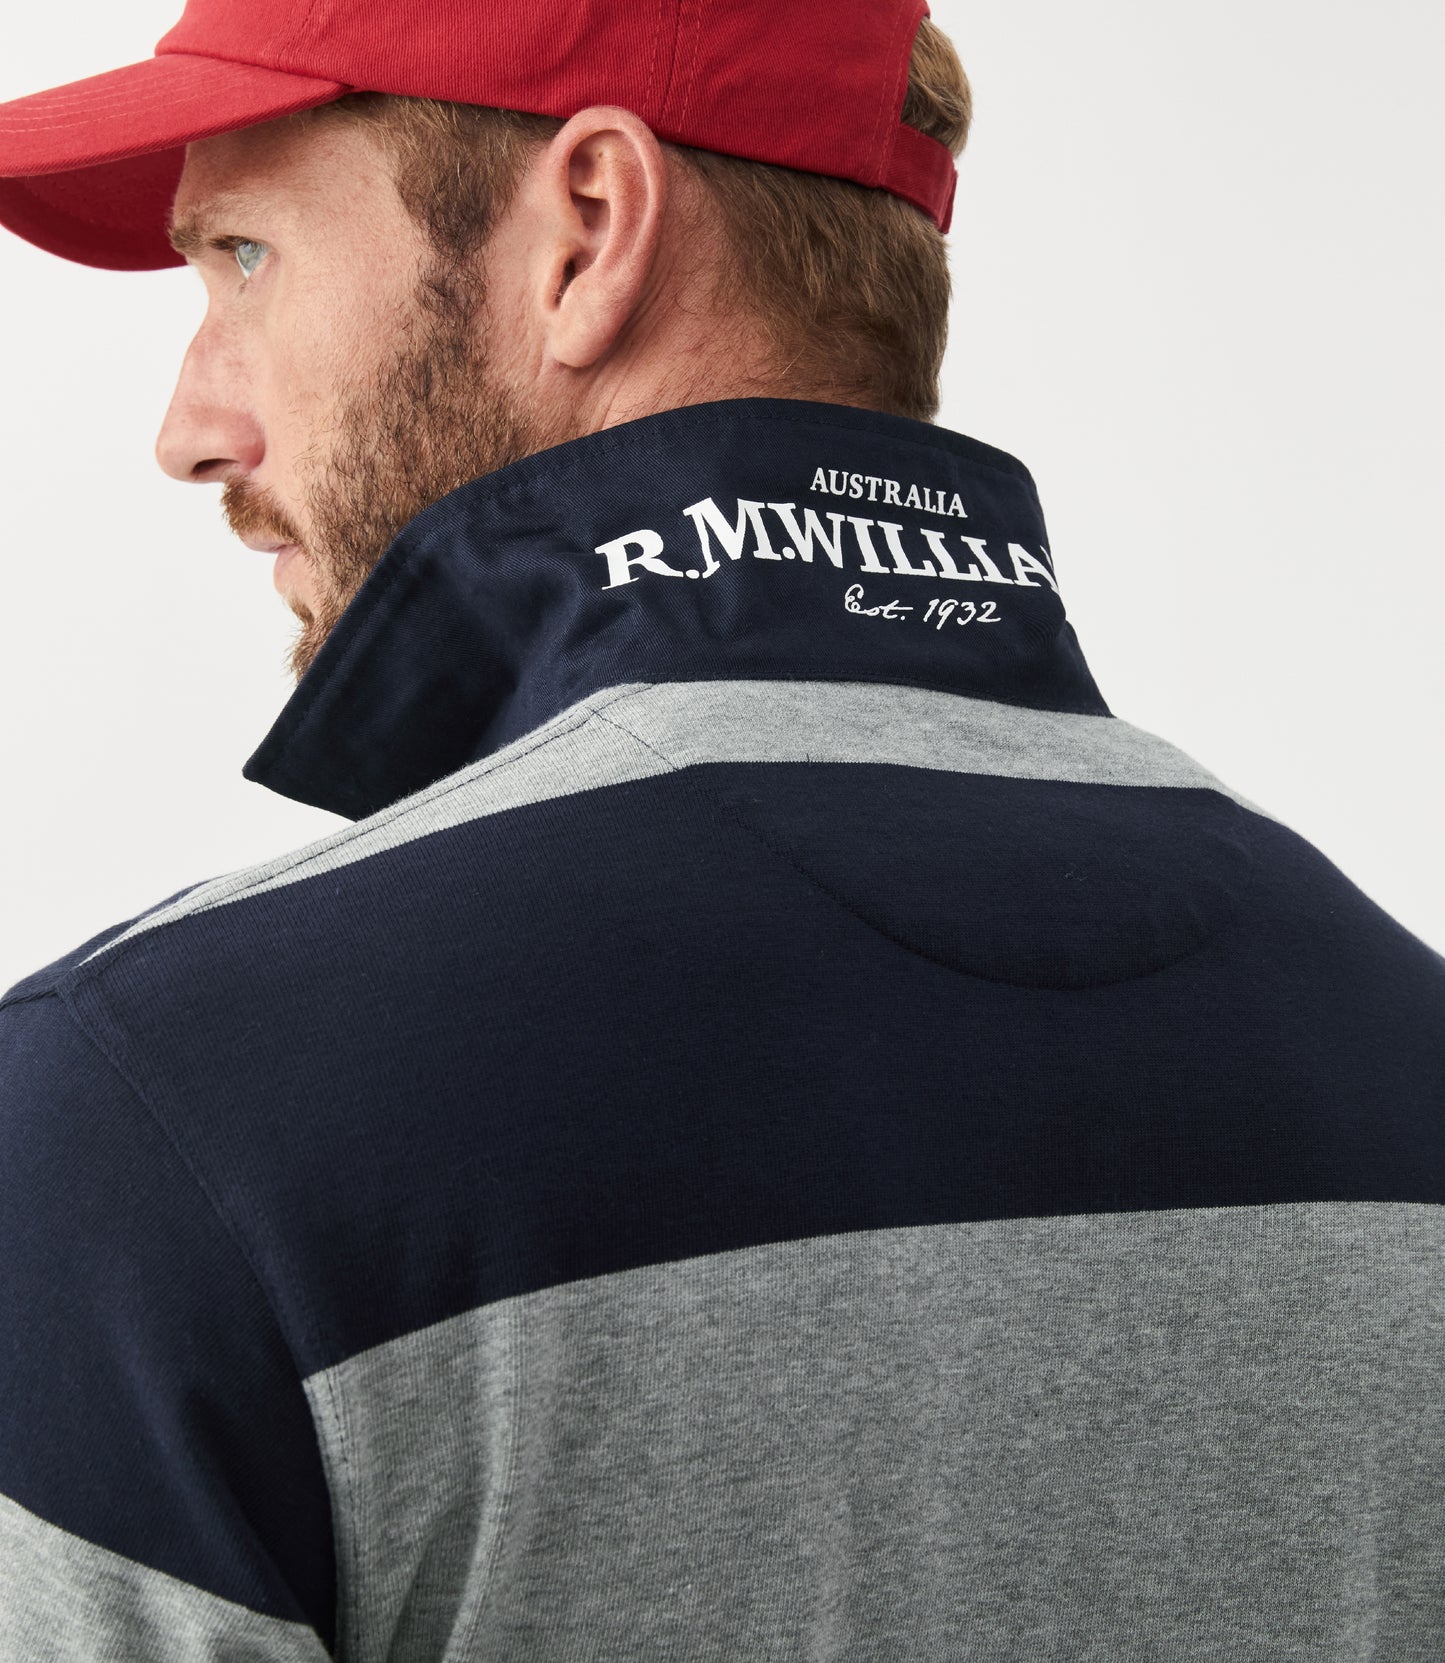 R.M Williams Rugby Shirts, The Tweedale Rugby in Navy/Grey